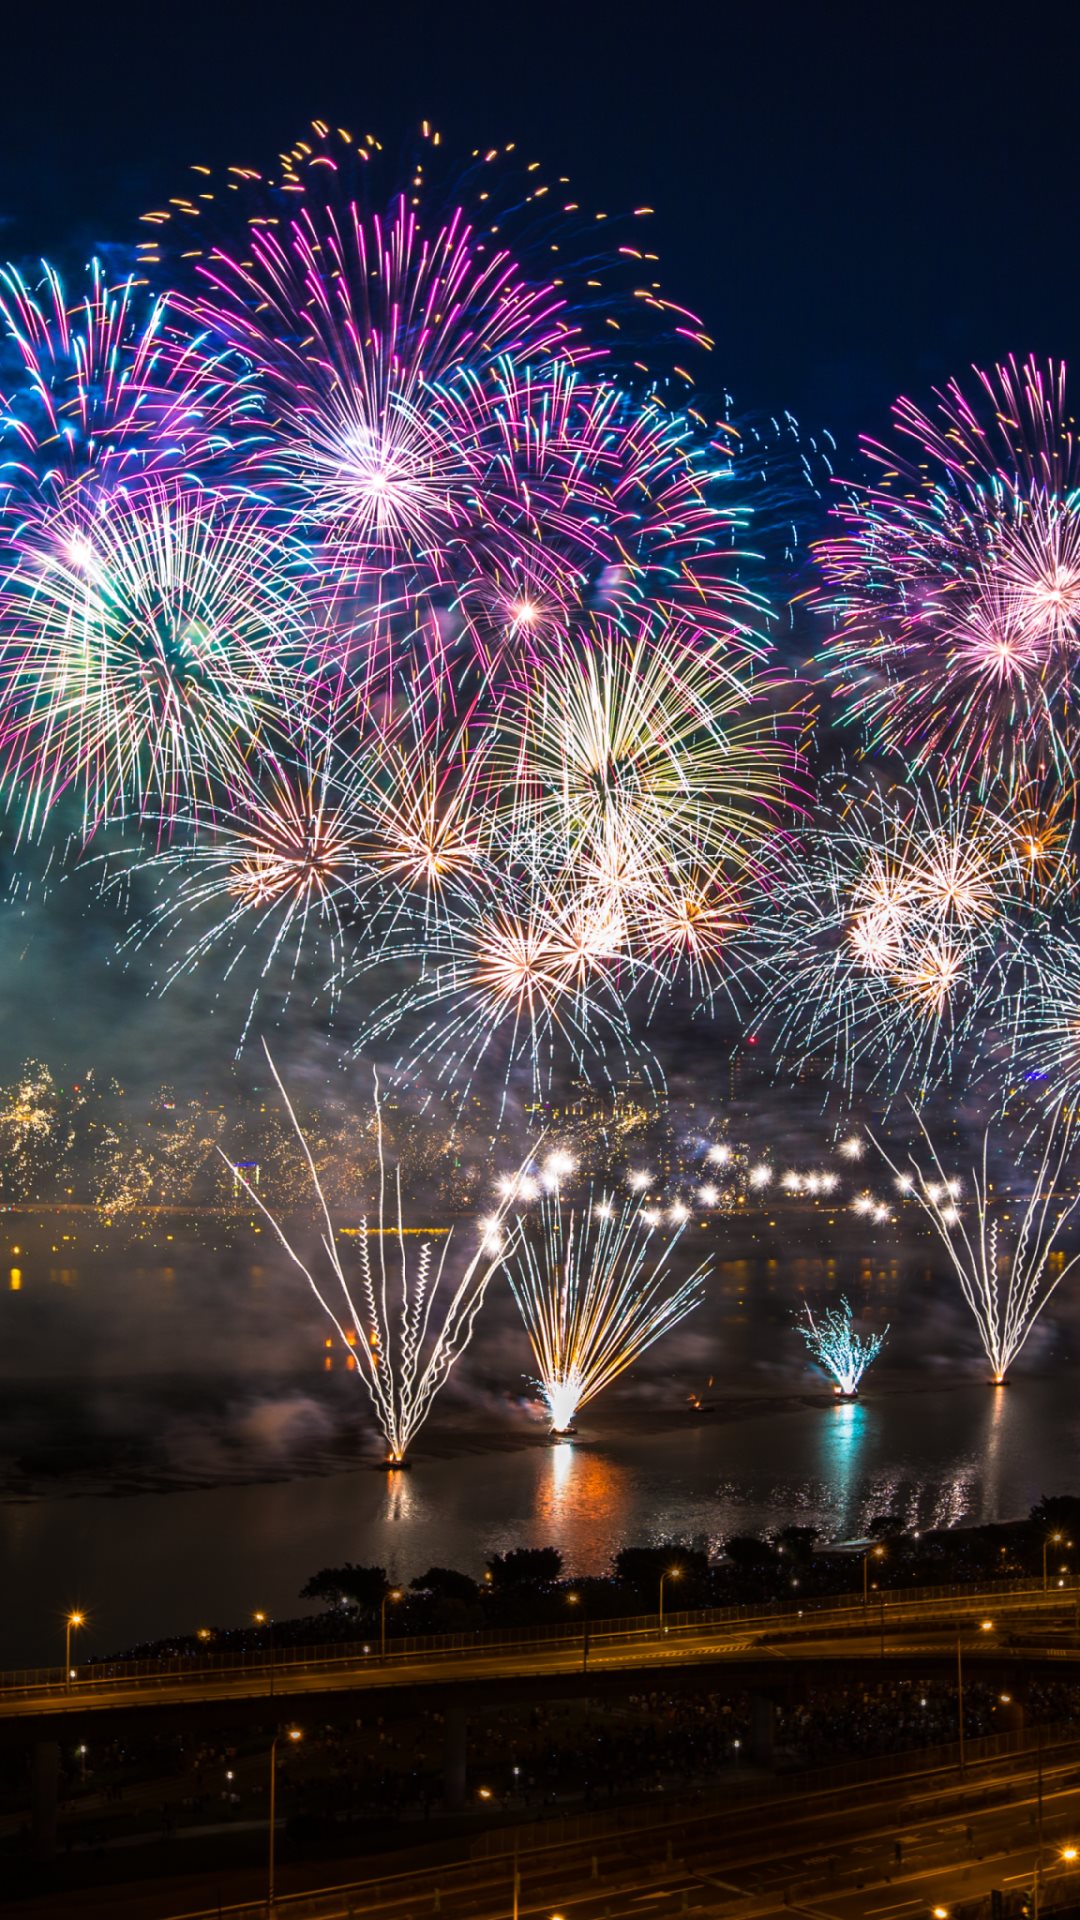 4K Fireworks Wallpapers High Quality | Download Free